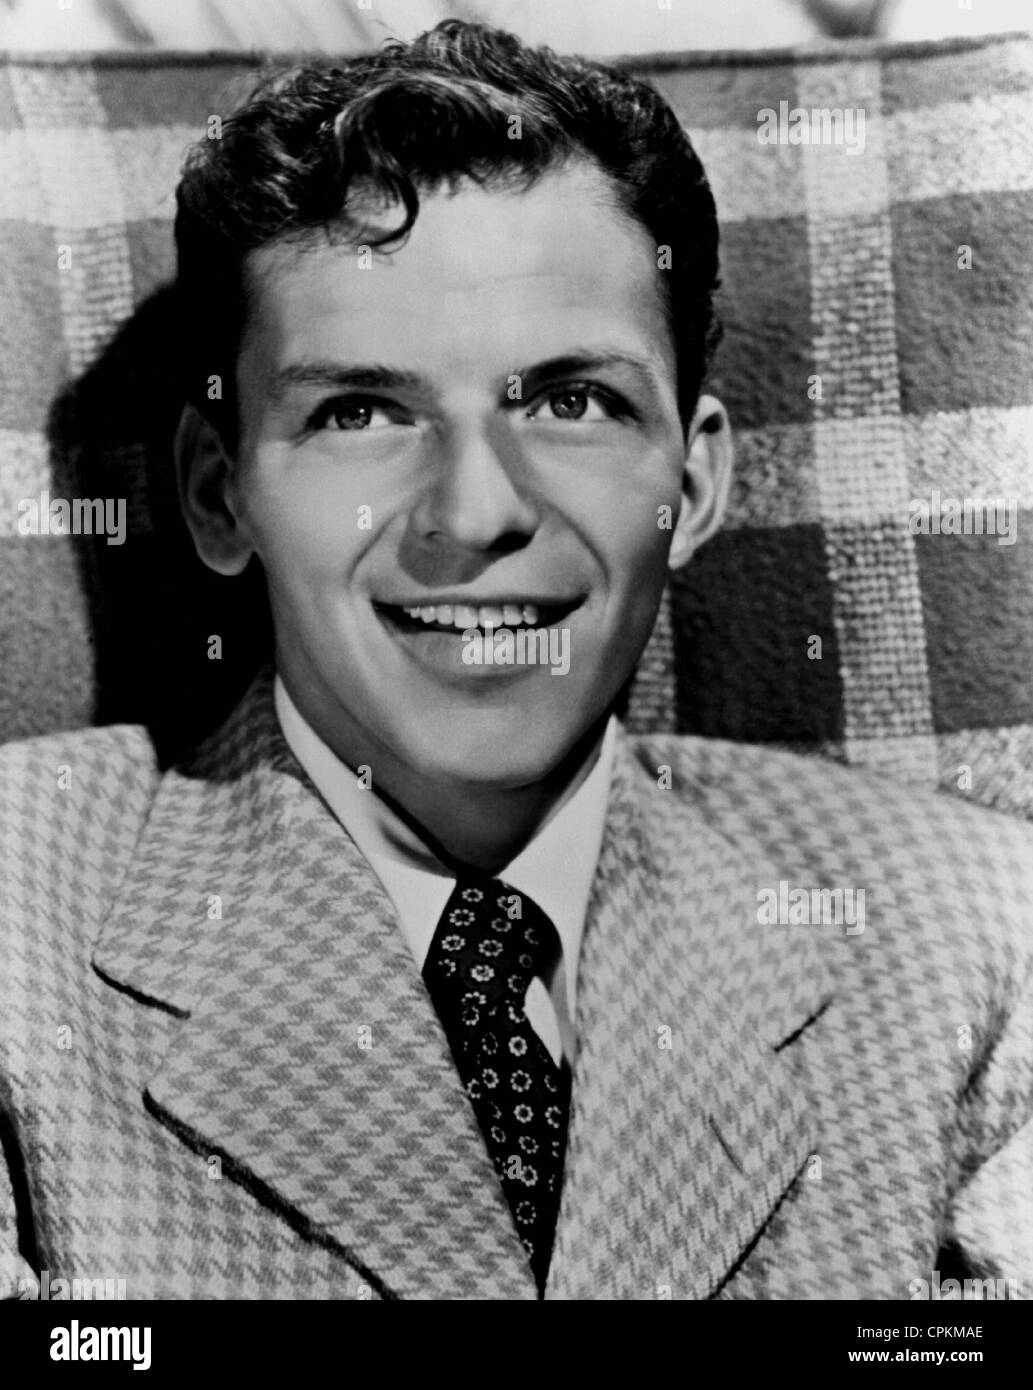 A black and white portrait of the film star and singer Frank Sinatra taken in Los Angeles in 1949. Stock Photo